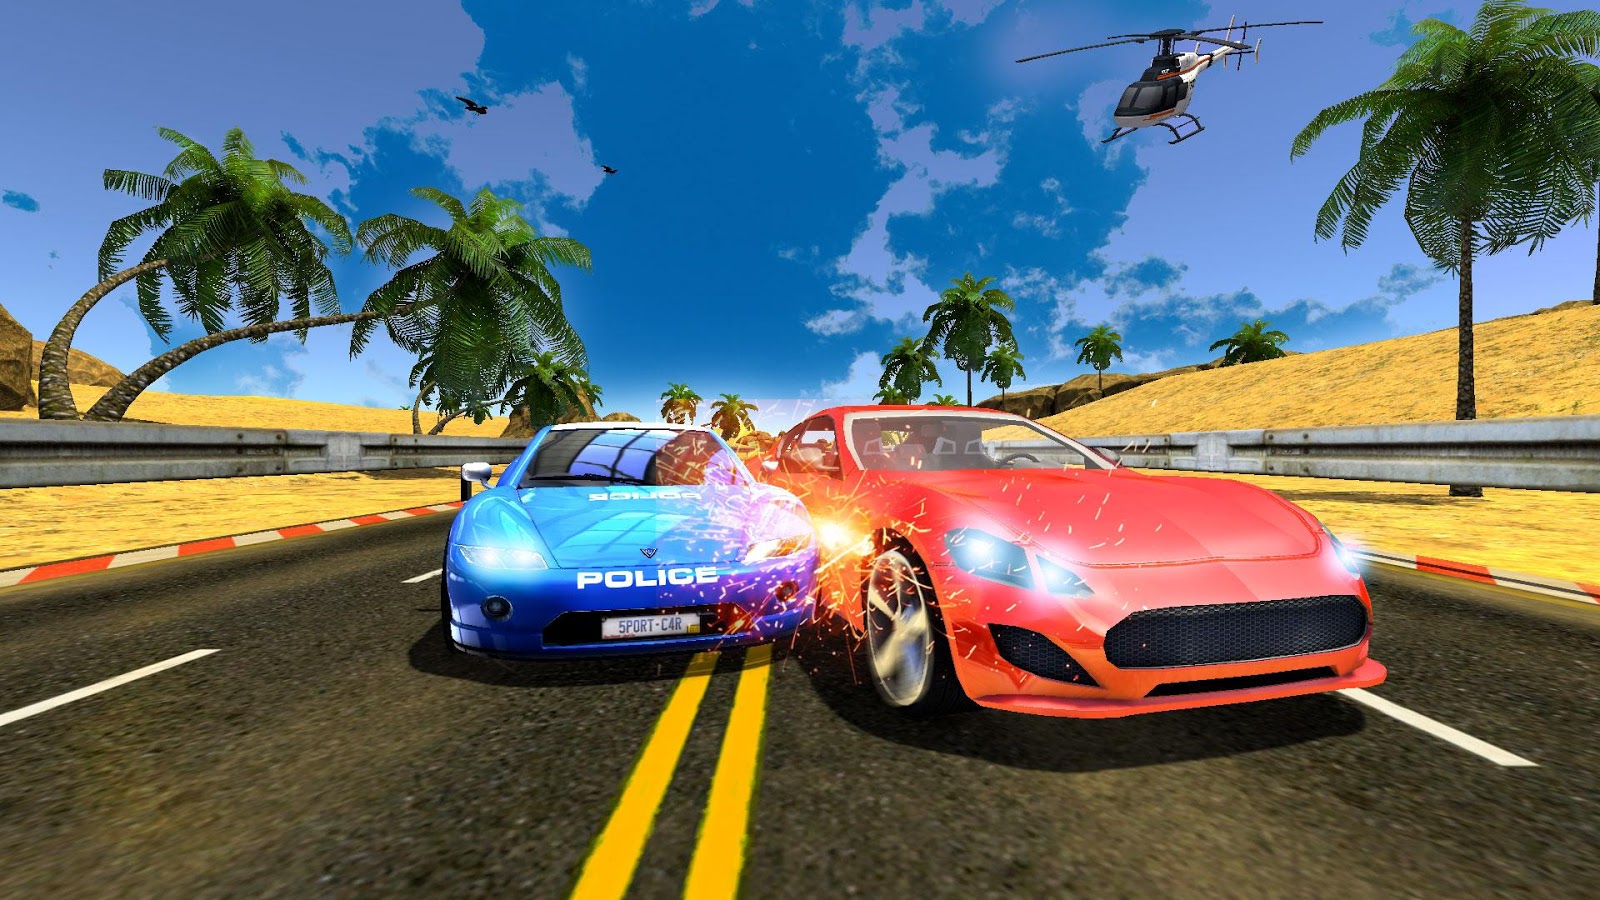 Offroad Police Gangster Chase Simulator HD截图3